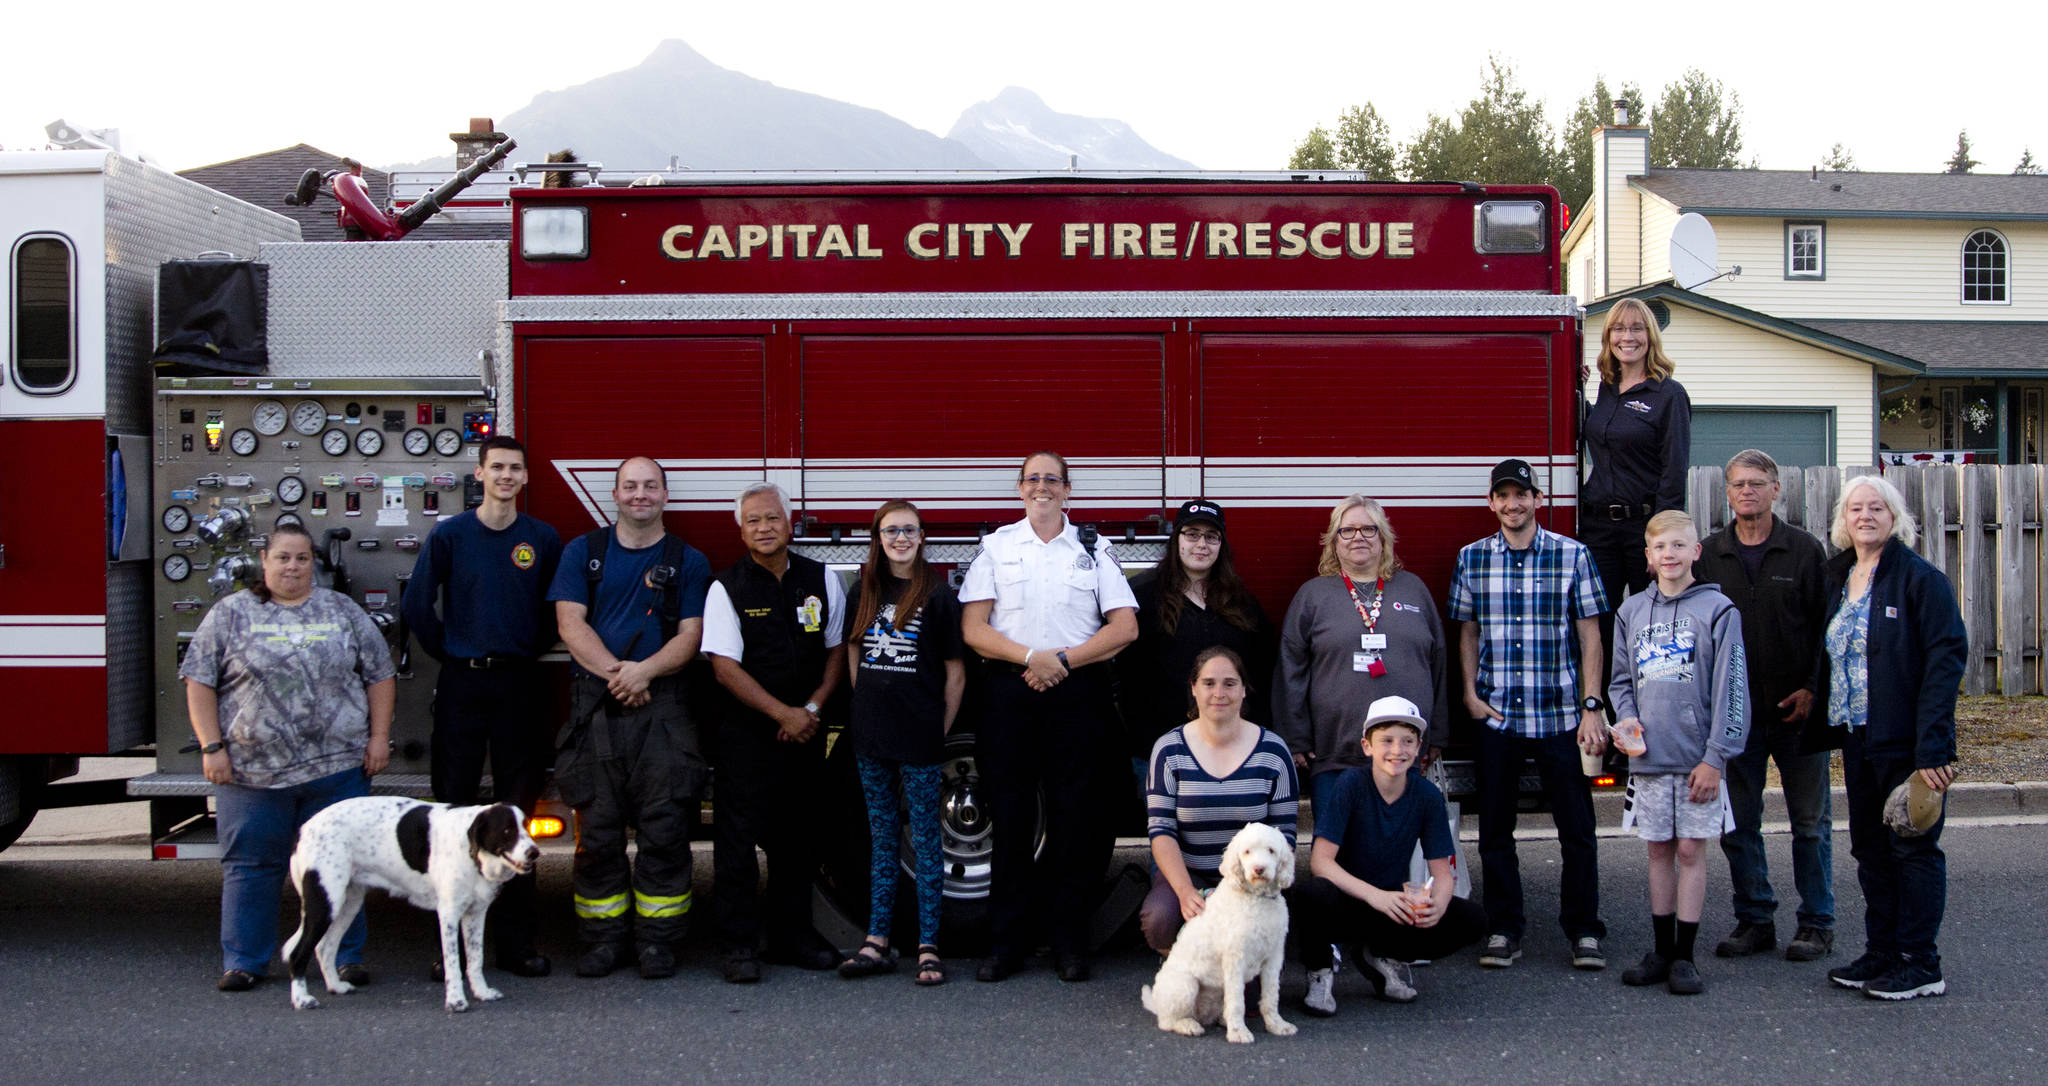 The Juneau Police Department organized participation in the National Night Out for all Juneau public services, including Capital City Fire/Rescue, the Alaska State Troopers, and other uniformed and nonuniformed public services, Aug. 6, 2019. (Photo by Michael S. Lockett | Juneau Empire)